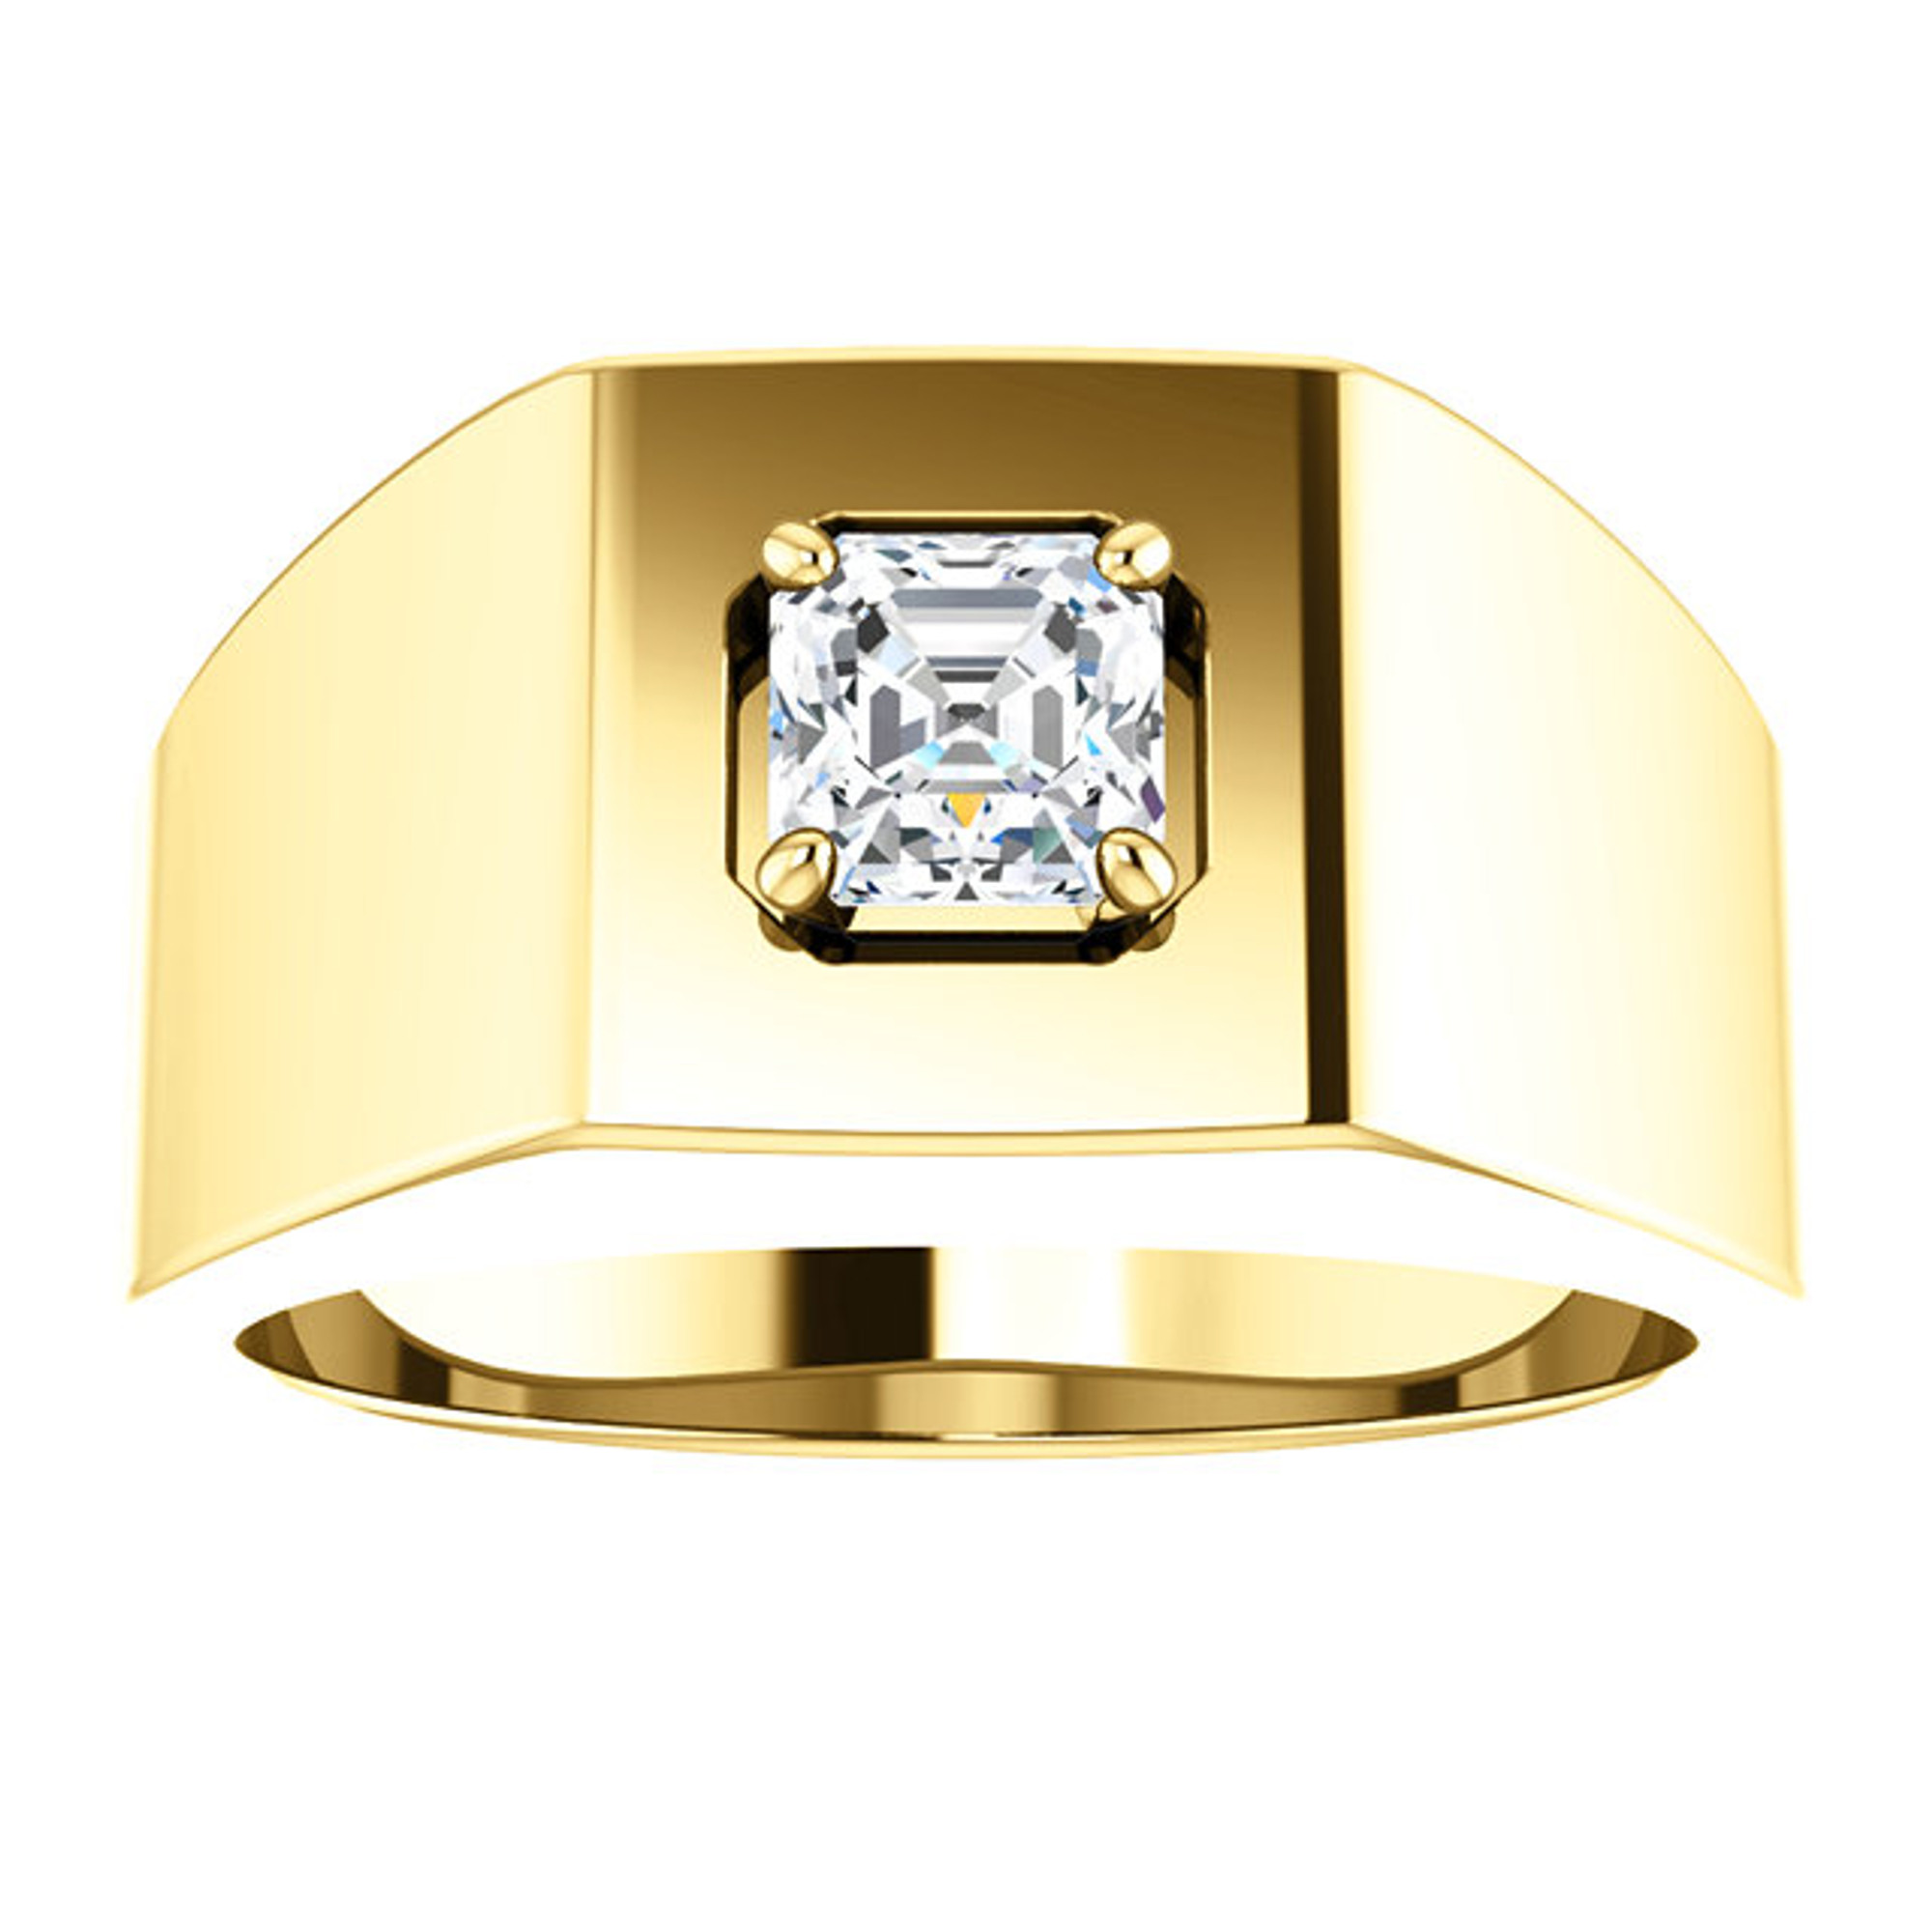 Hugo Signet Ring by George Rings - solid 18k yellow gold signet ring